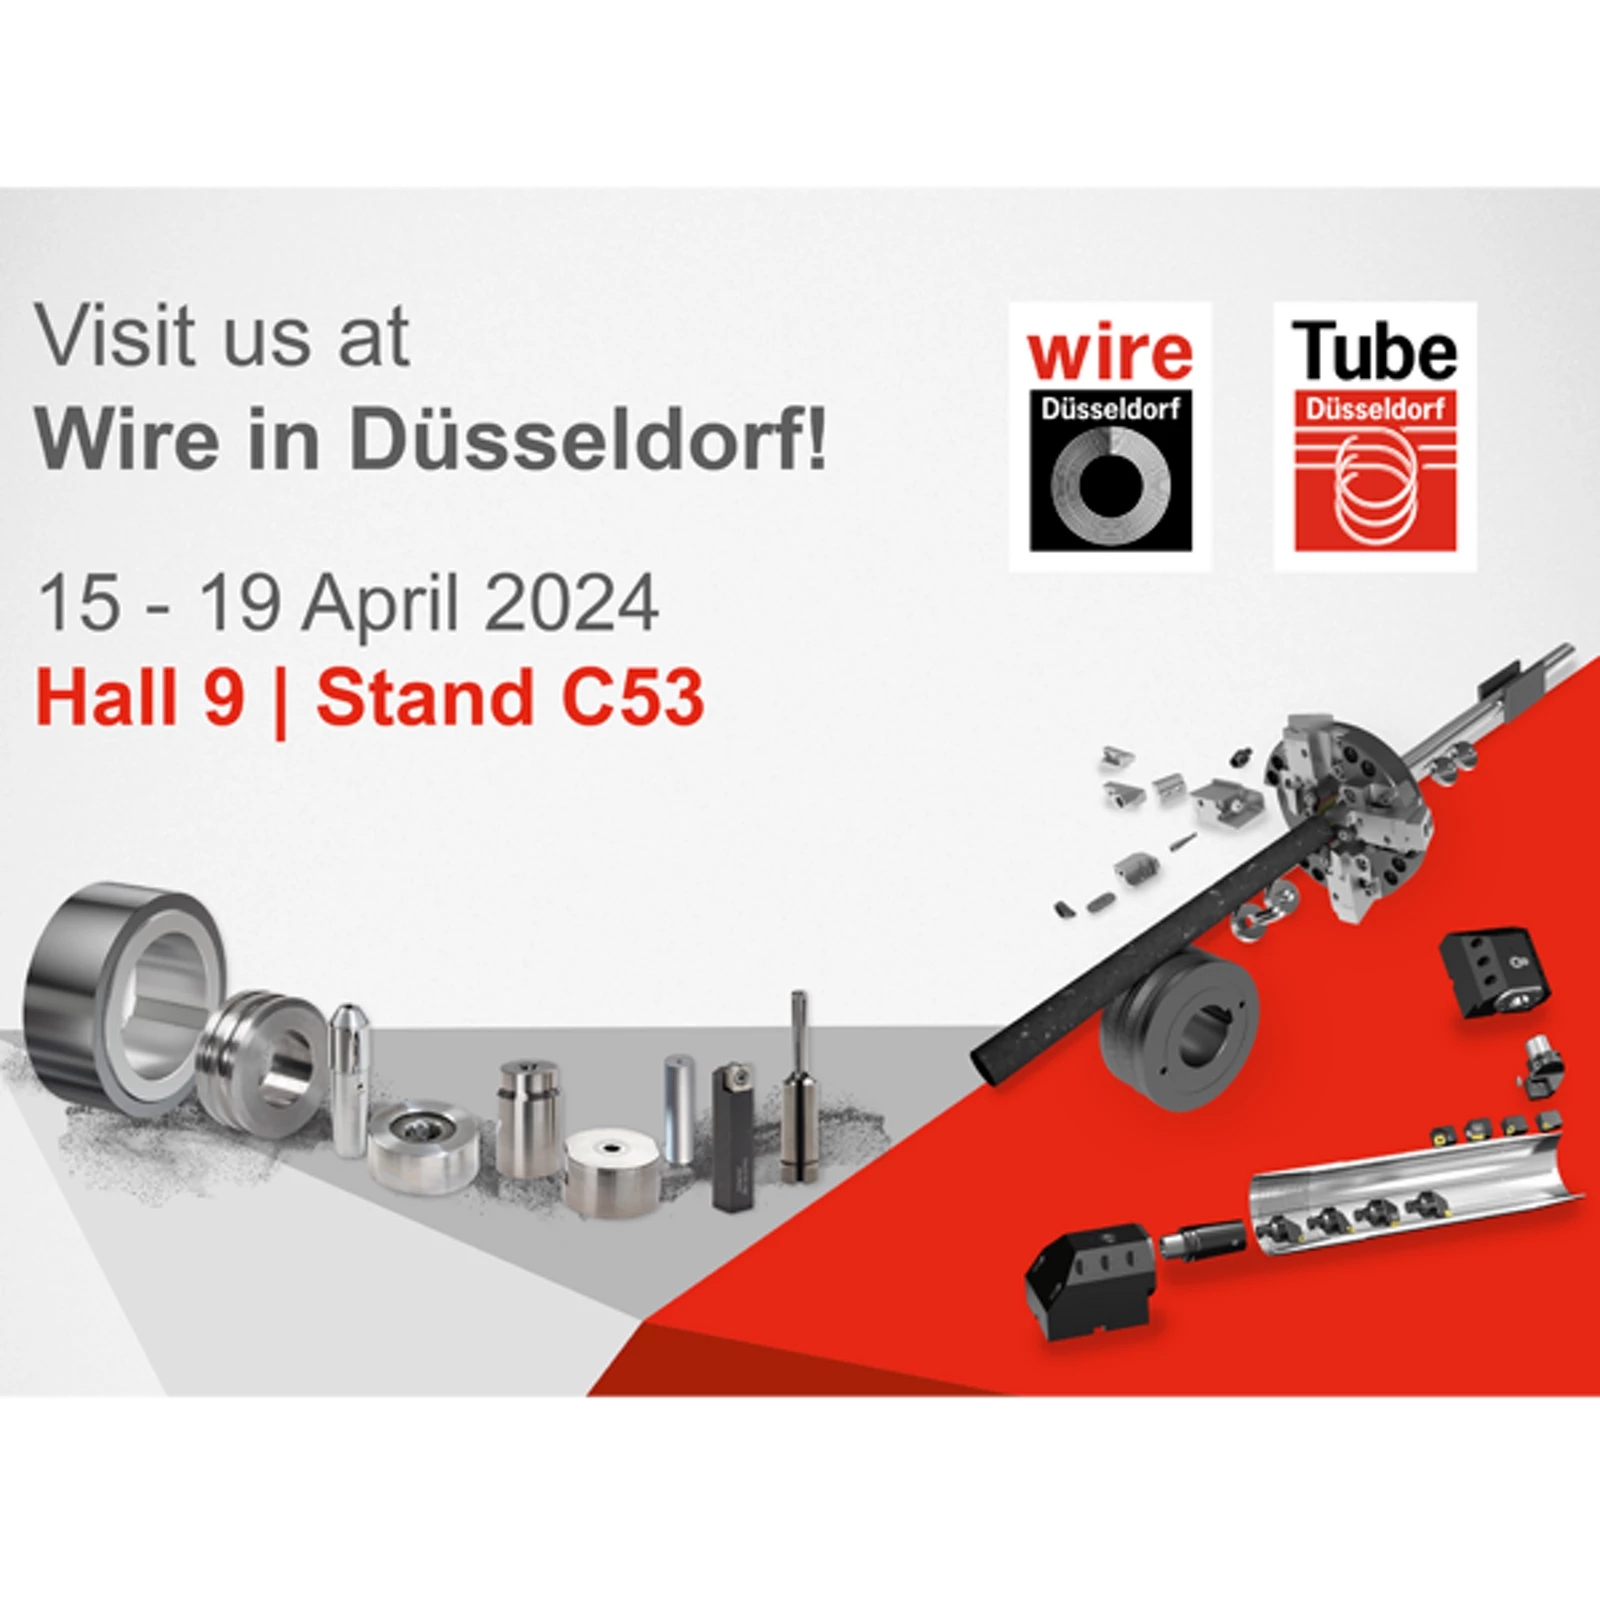 Join CERATIZIT at Wire and Tube 2024 in Düsseldorf